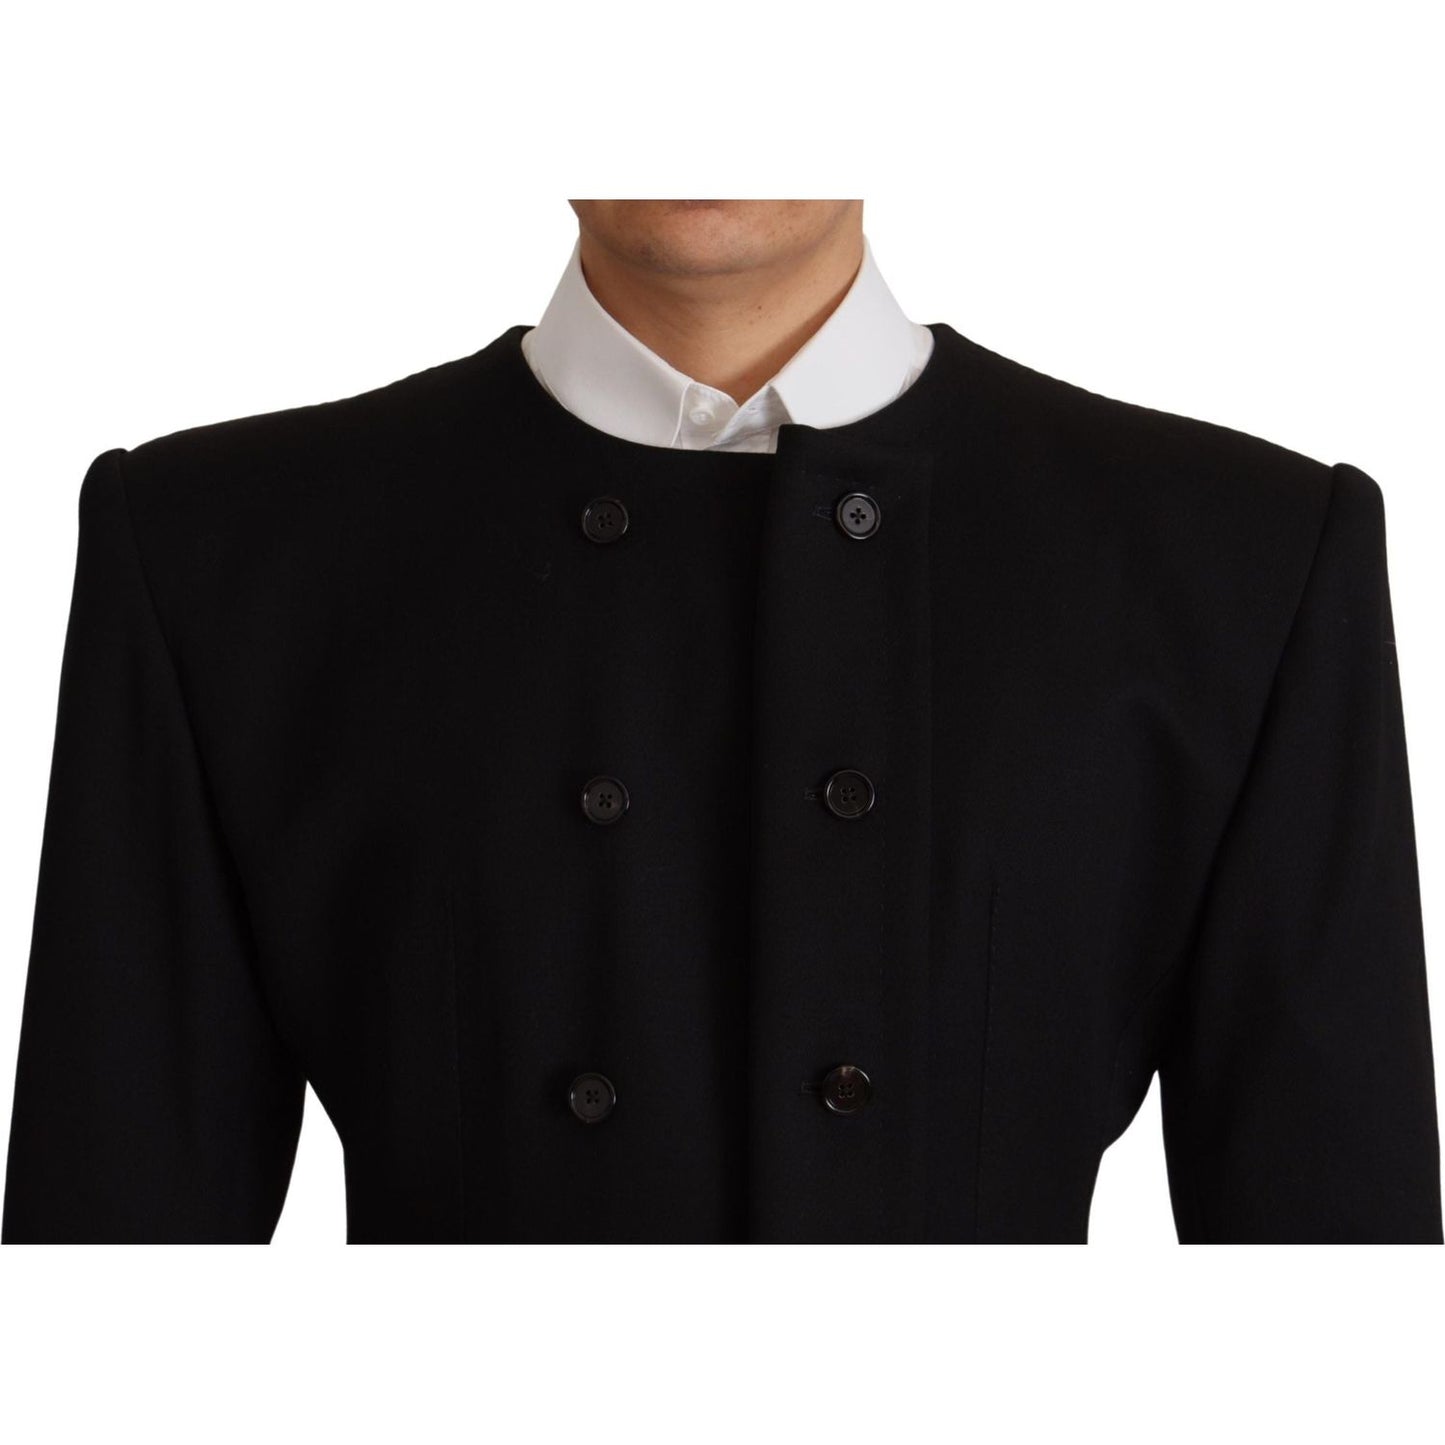 Dolce & Gabbana Elegant Slim Fit Double Breasted Wool Blazer black-wool-double-breasted-blazer-jacket